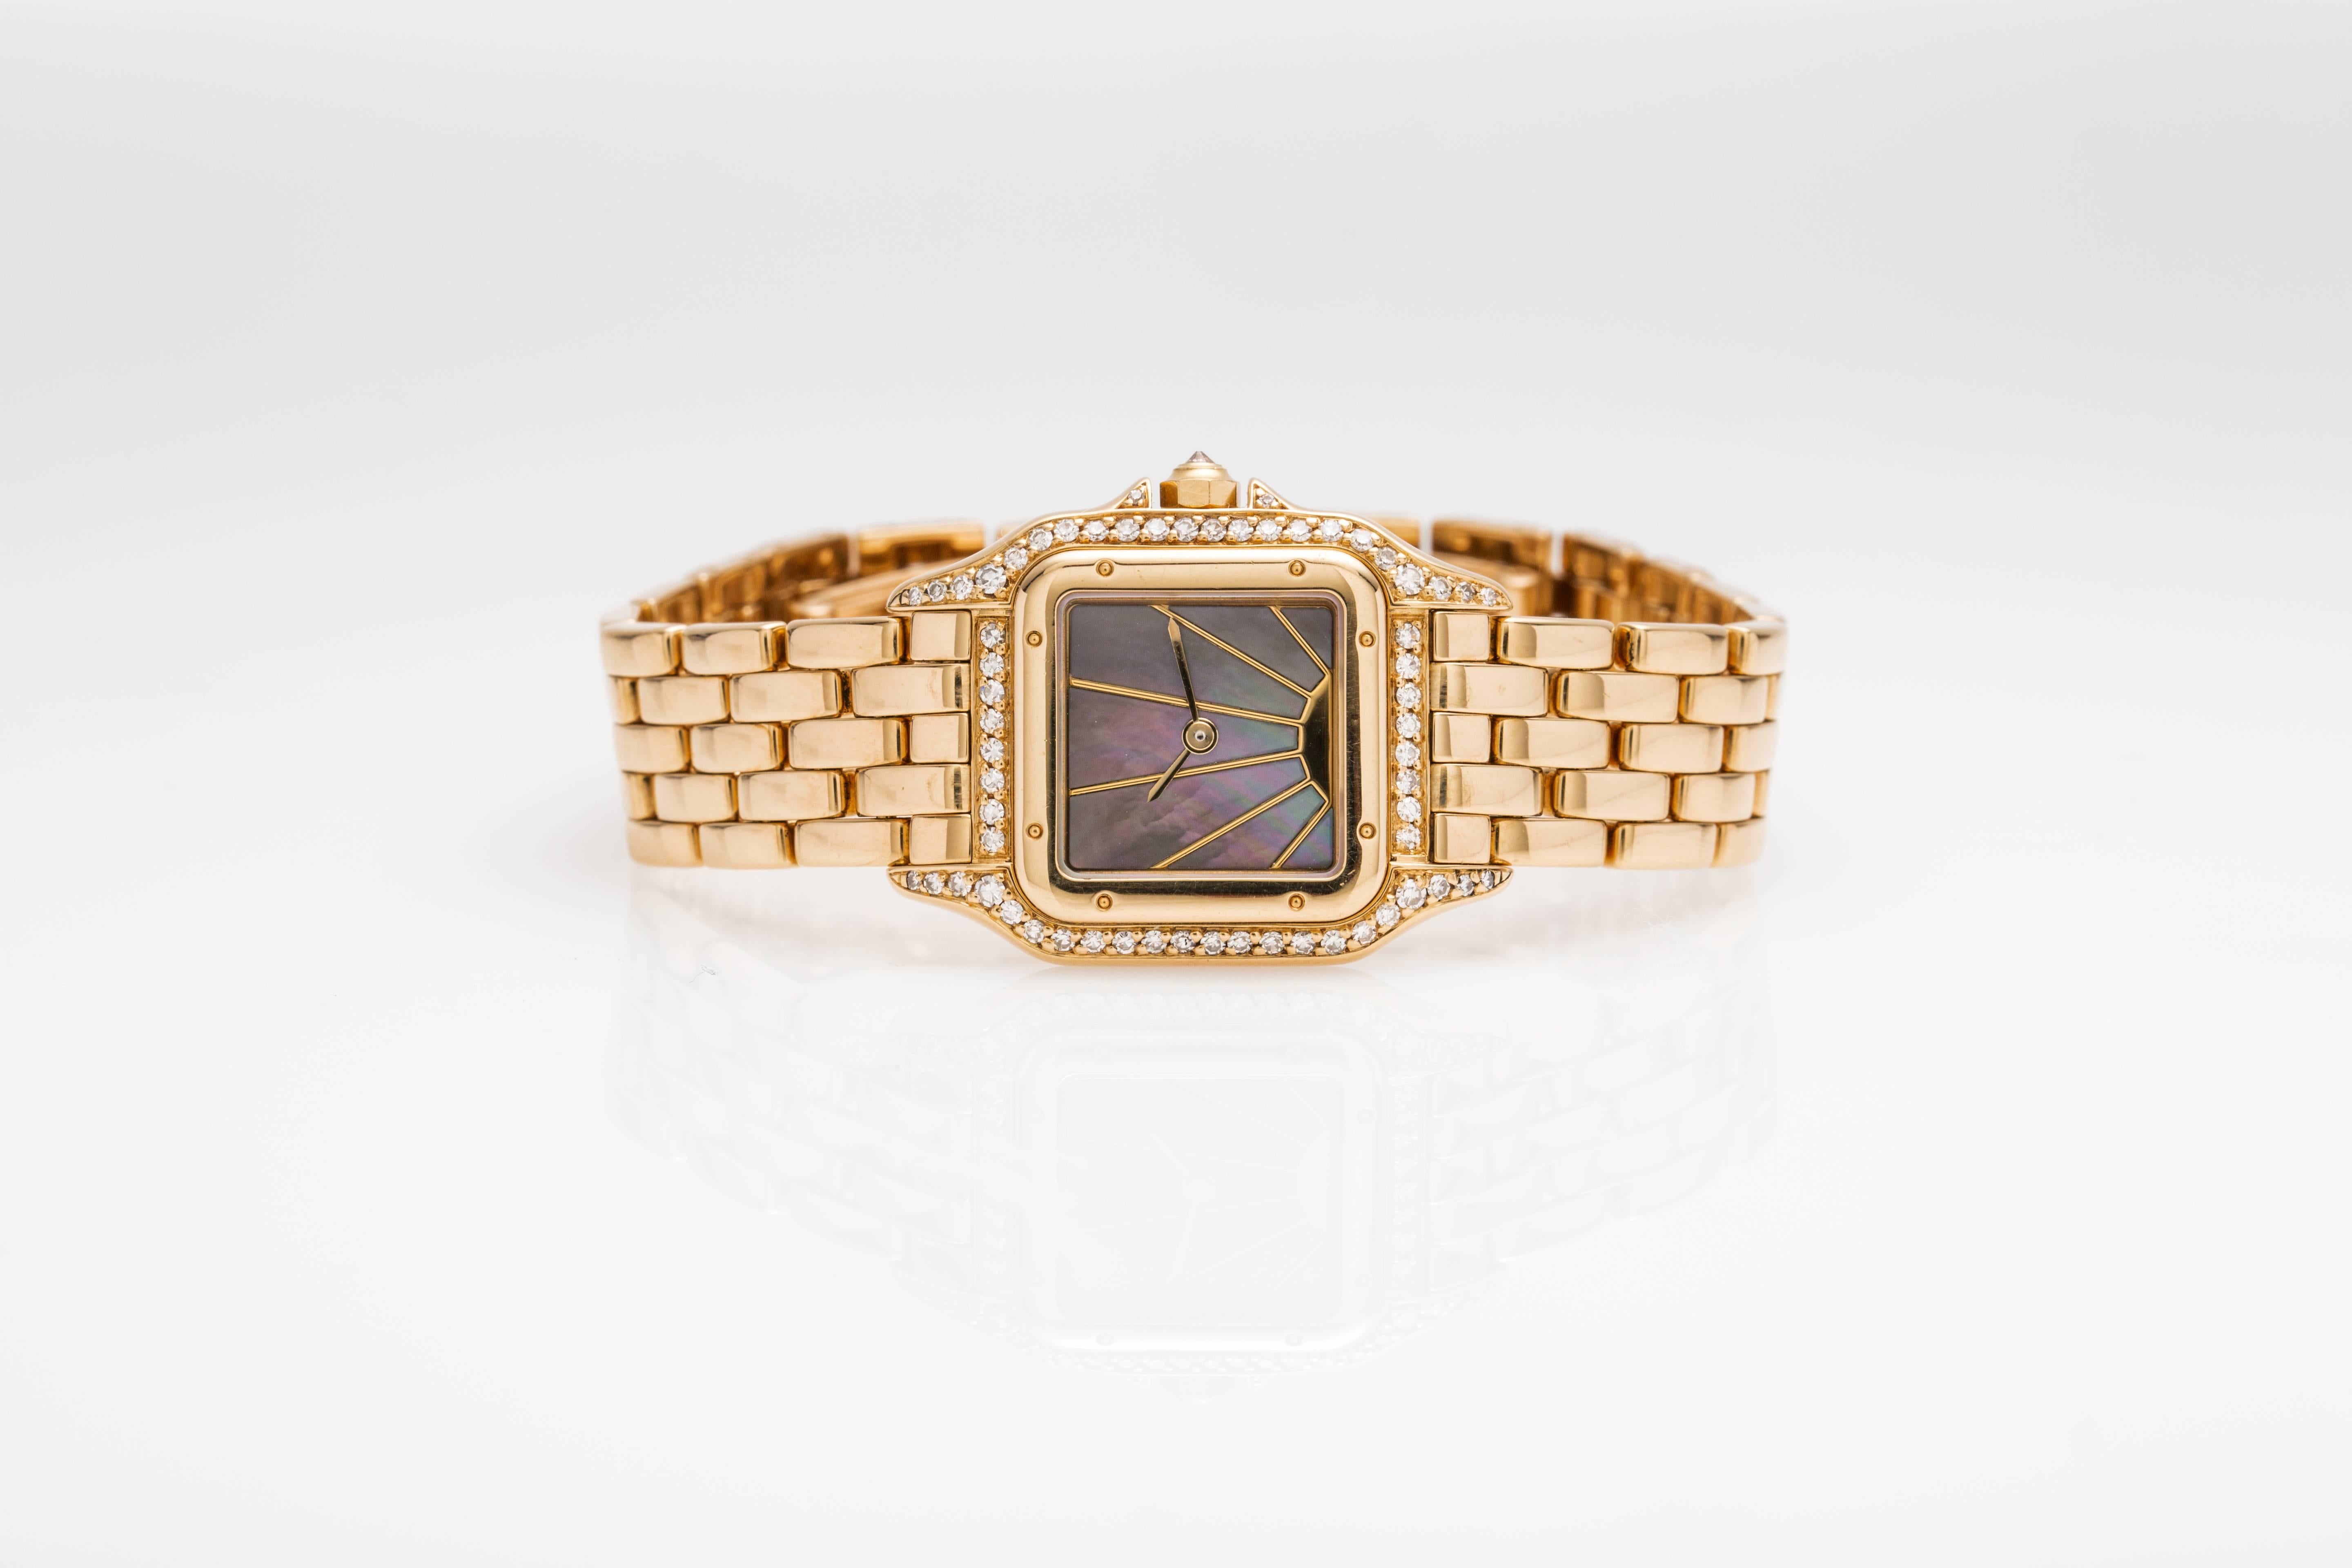 Rare Cartier Panthere watch, 18k yellow gold case and bracelet. Brown mother of pearl dial with starburst design. Diamond bezel and lugs. Model #8057915 
Beautiful Condition. Expertly Restored by watchmakers sold with a 1 year warranty. Quartz